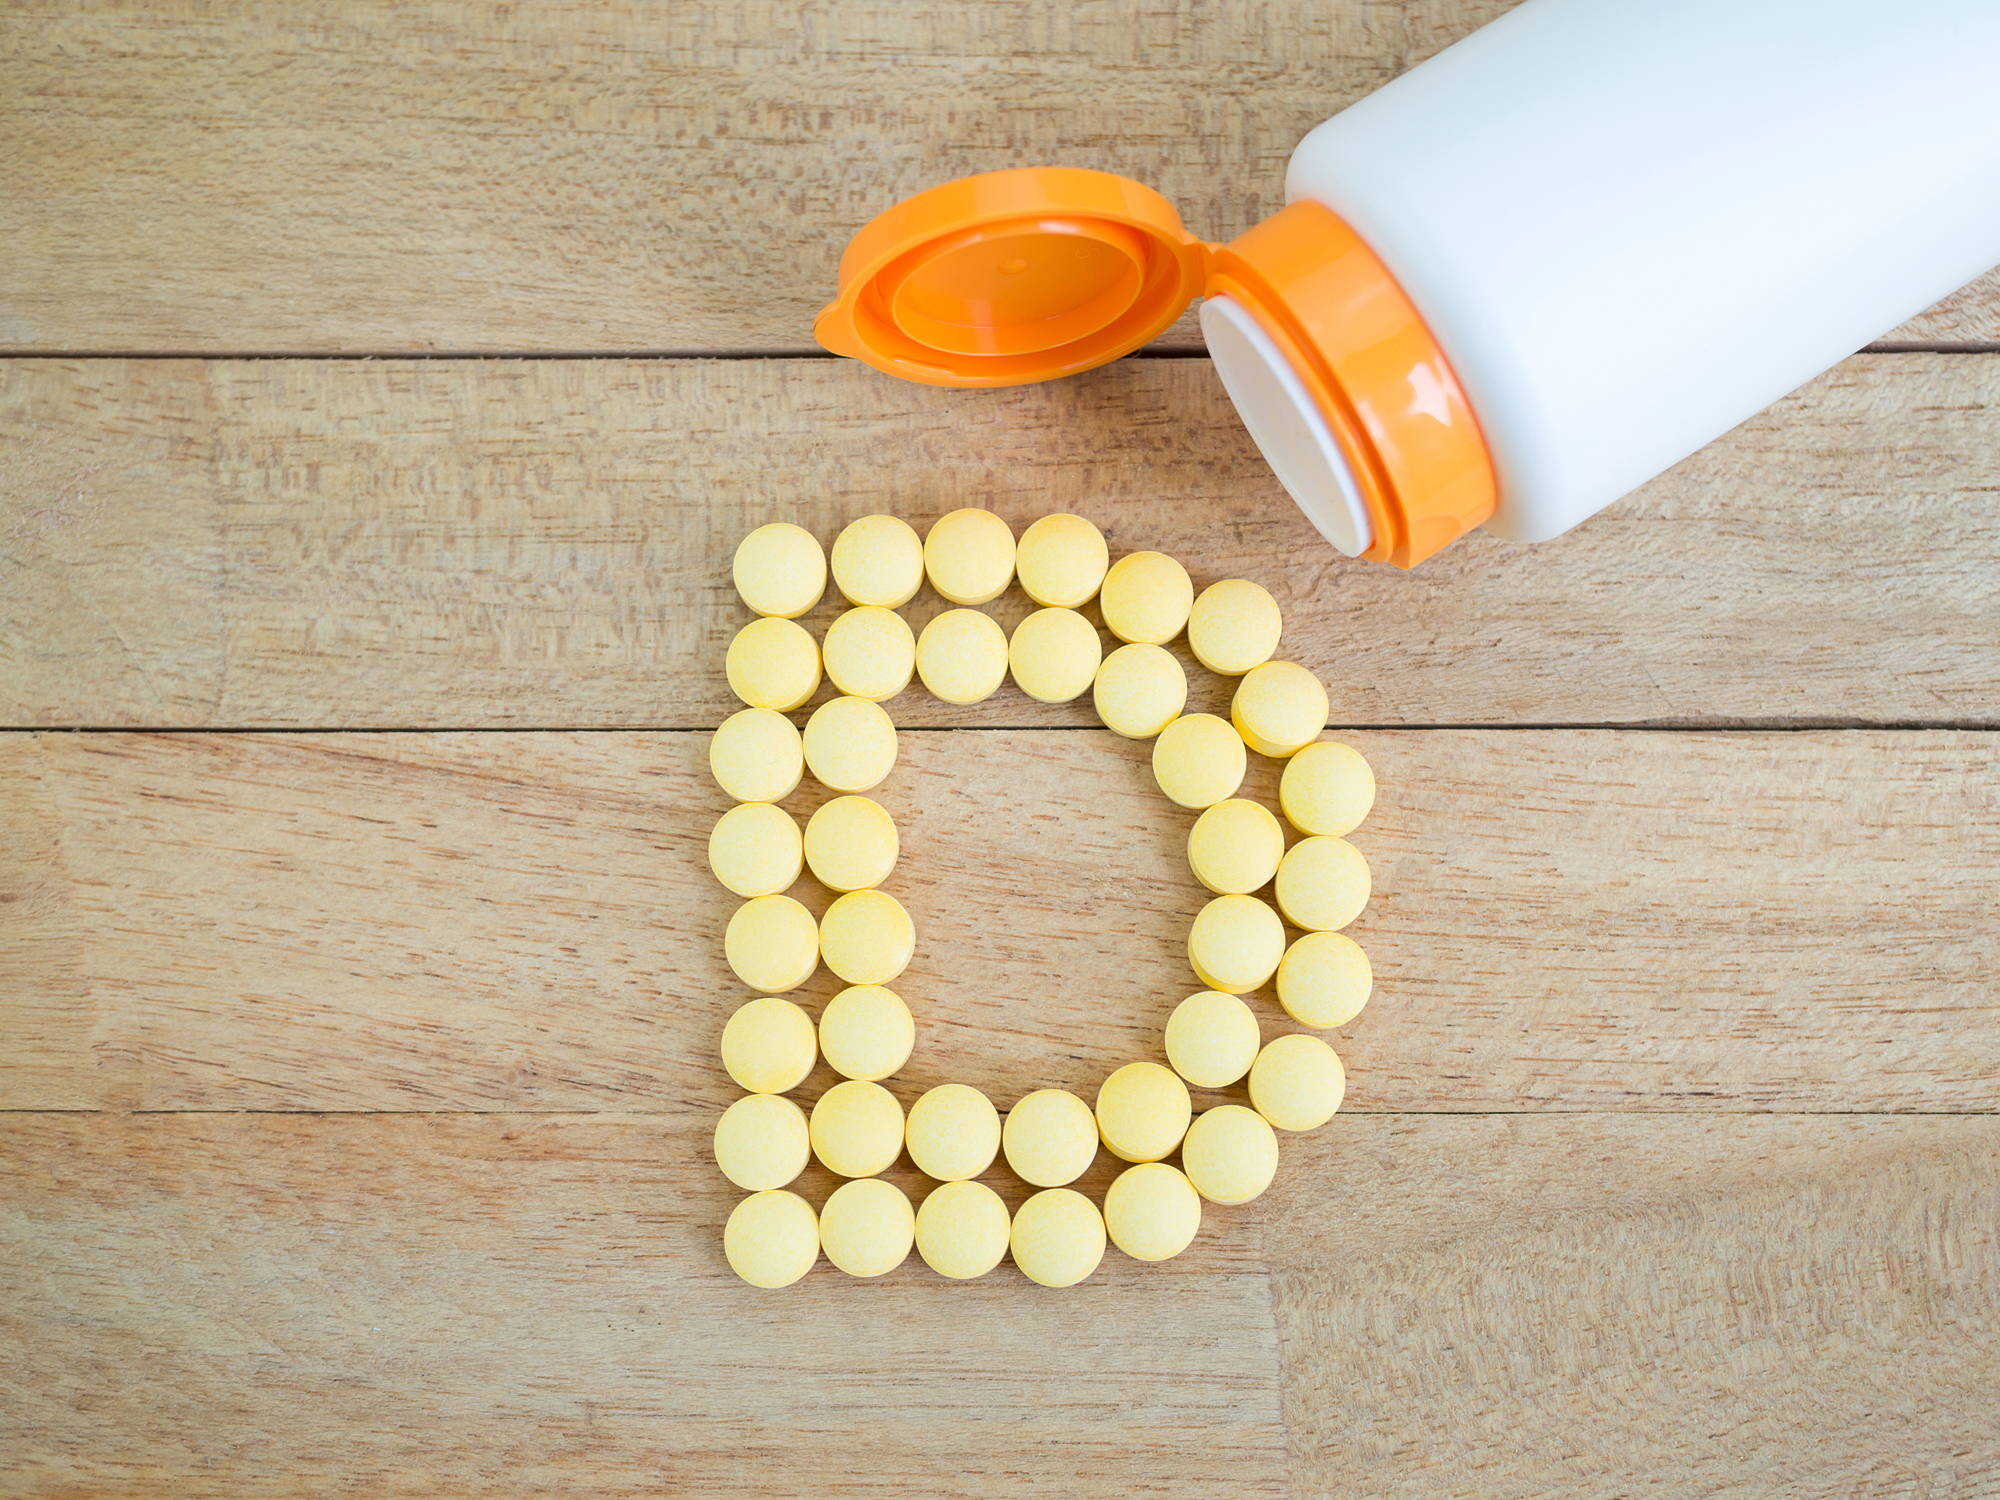 The other supplement that helps you get the most from vitamin D